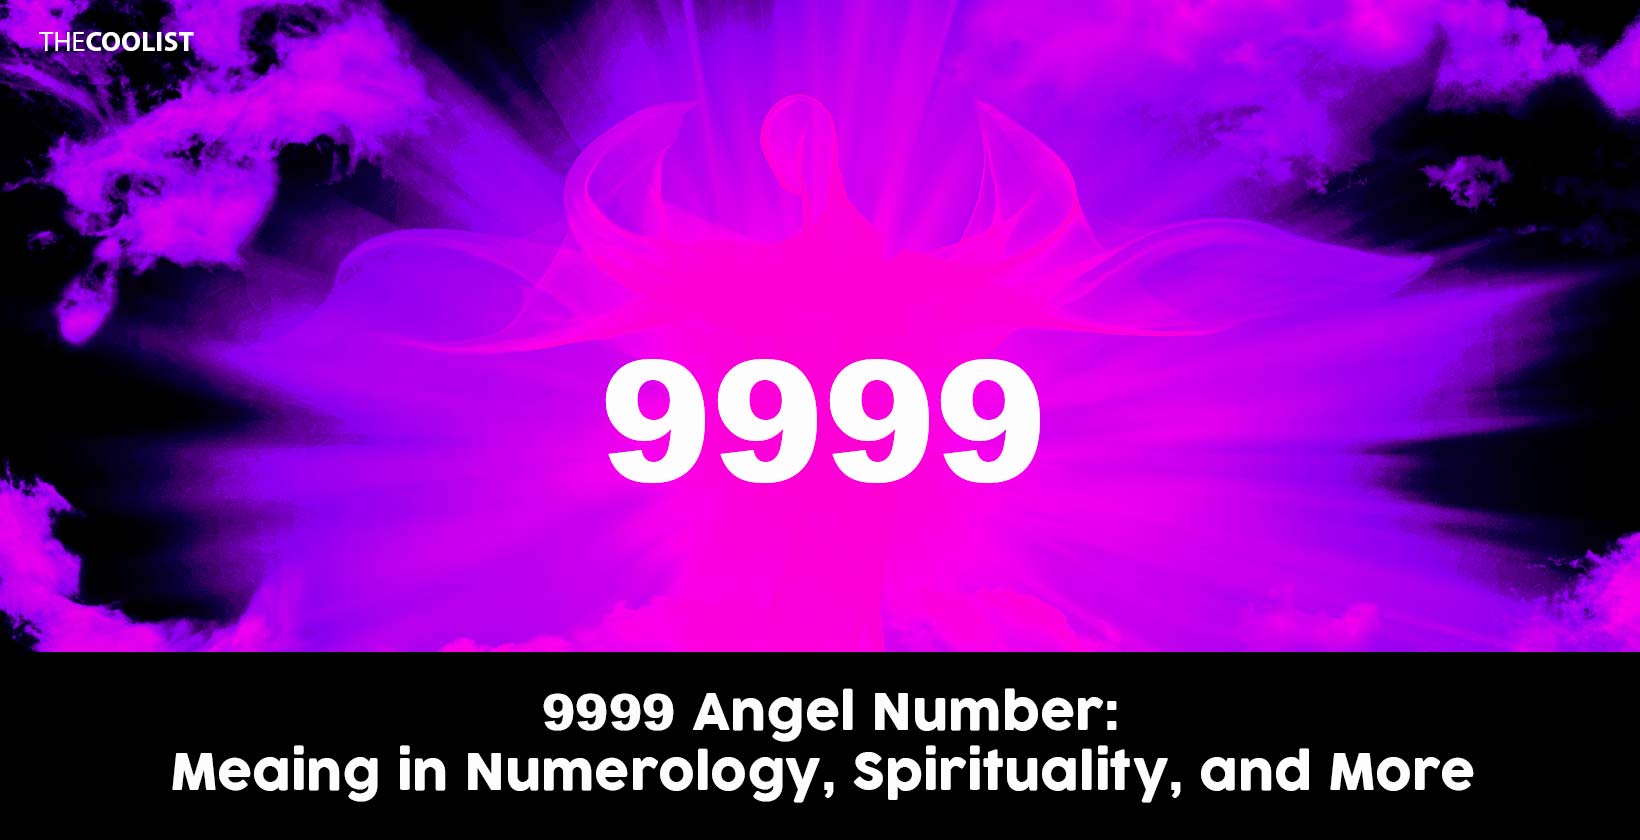 9999 Angel Number: Meaning in Numerology, Spirituality, and More